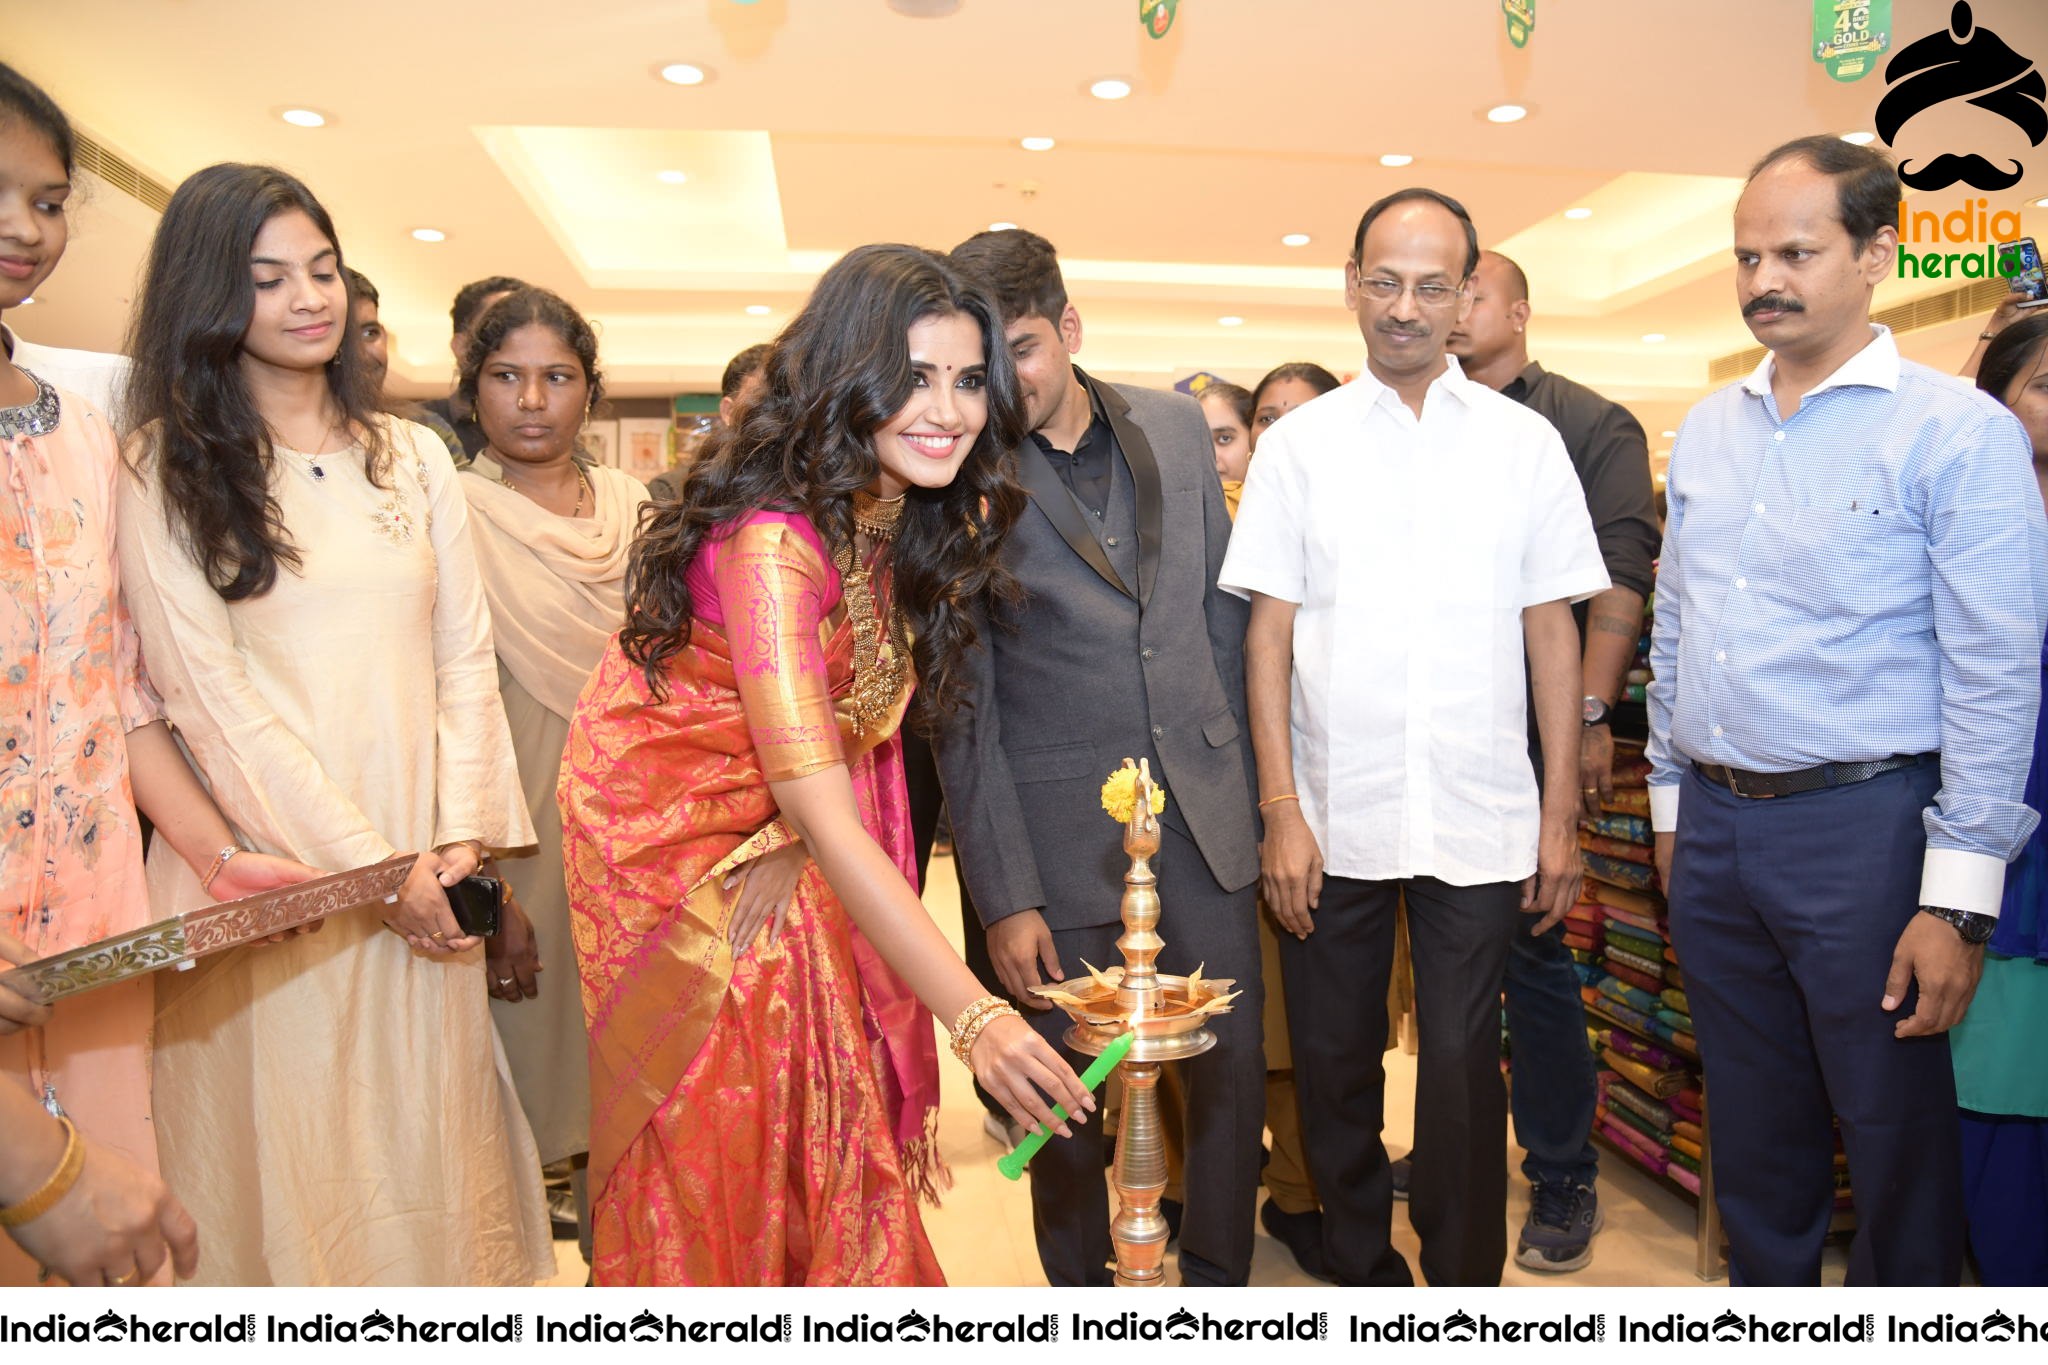 Anutex Shopping Mall Grand Festival Prizes And Collection Launched By Actress Anupama Parameswaran Set 1